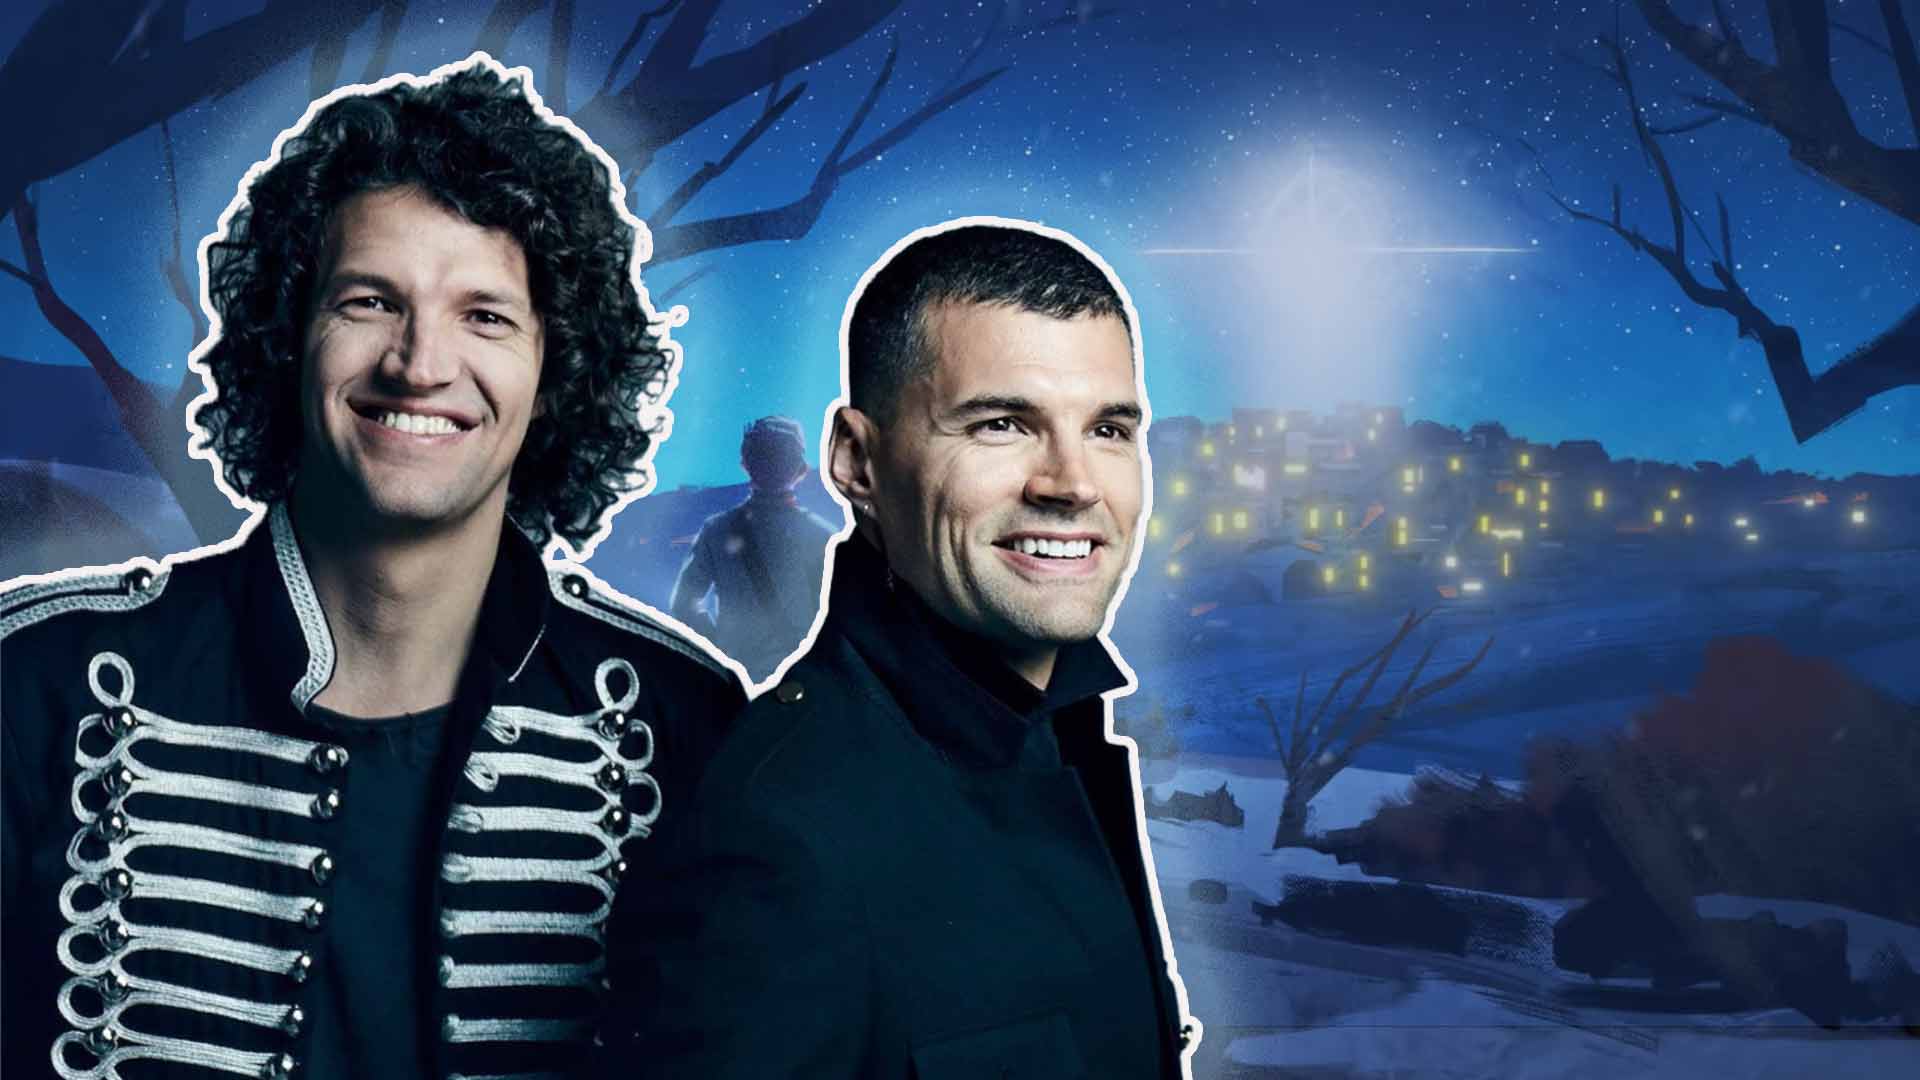 Joel and Luke Smallbone of for KING & COUNTRY relese the first single Joy to the World off of their full length Christmas Album A Drummer Boy Christmas